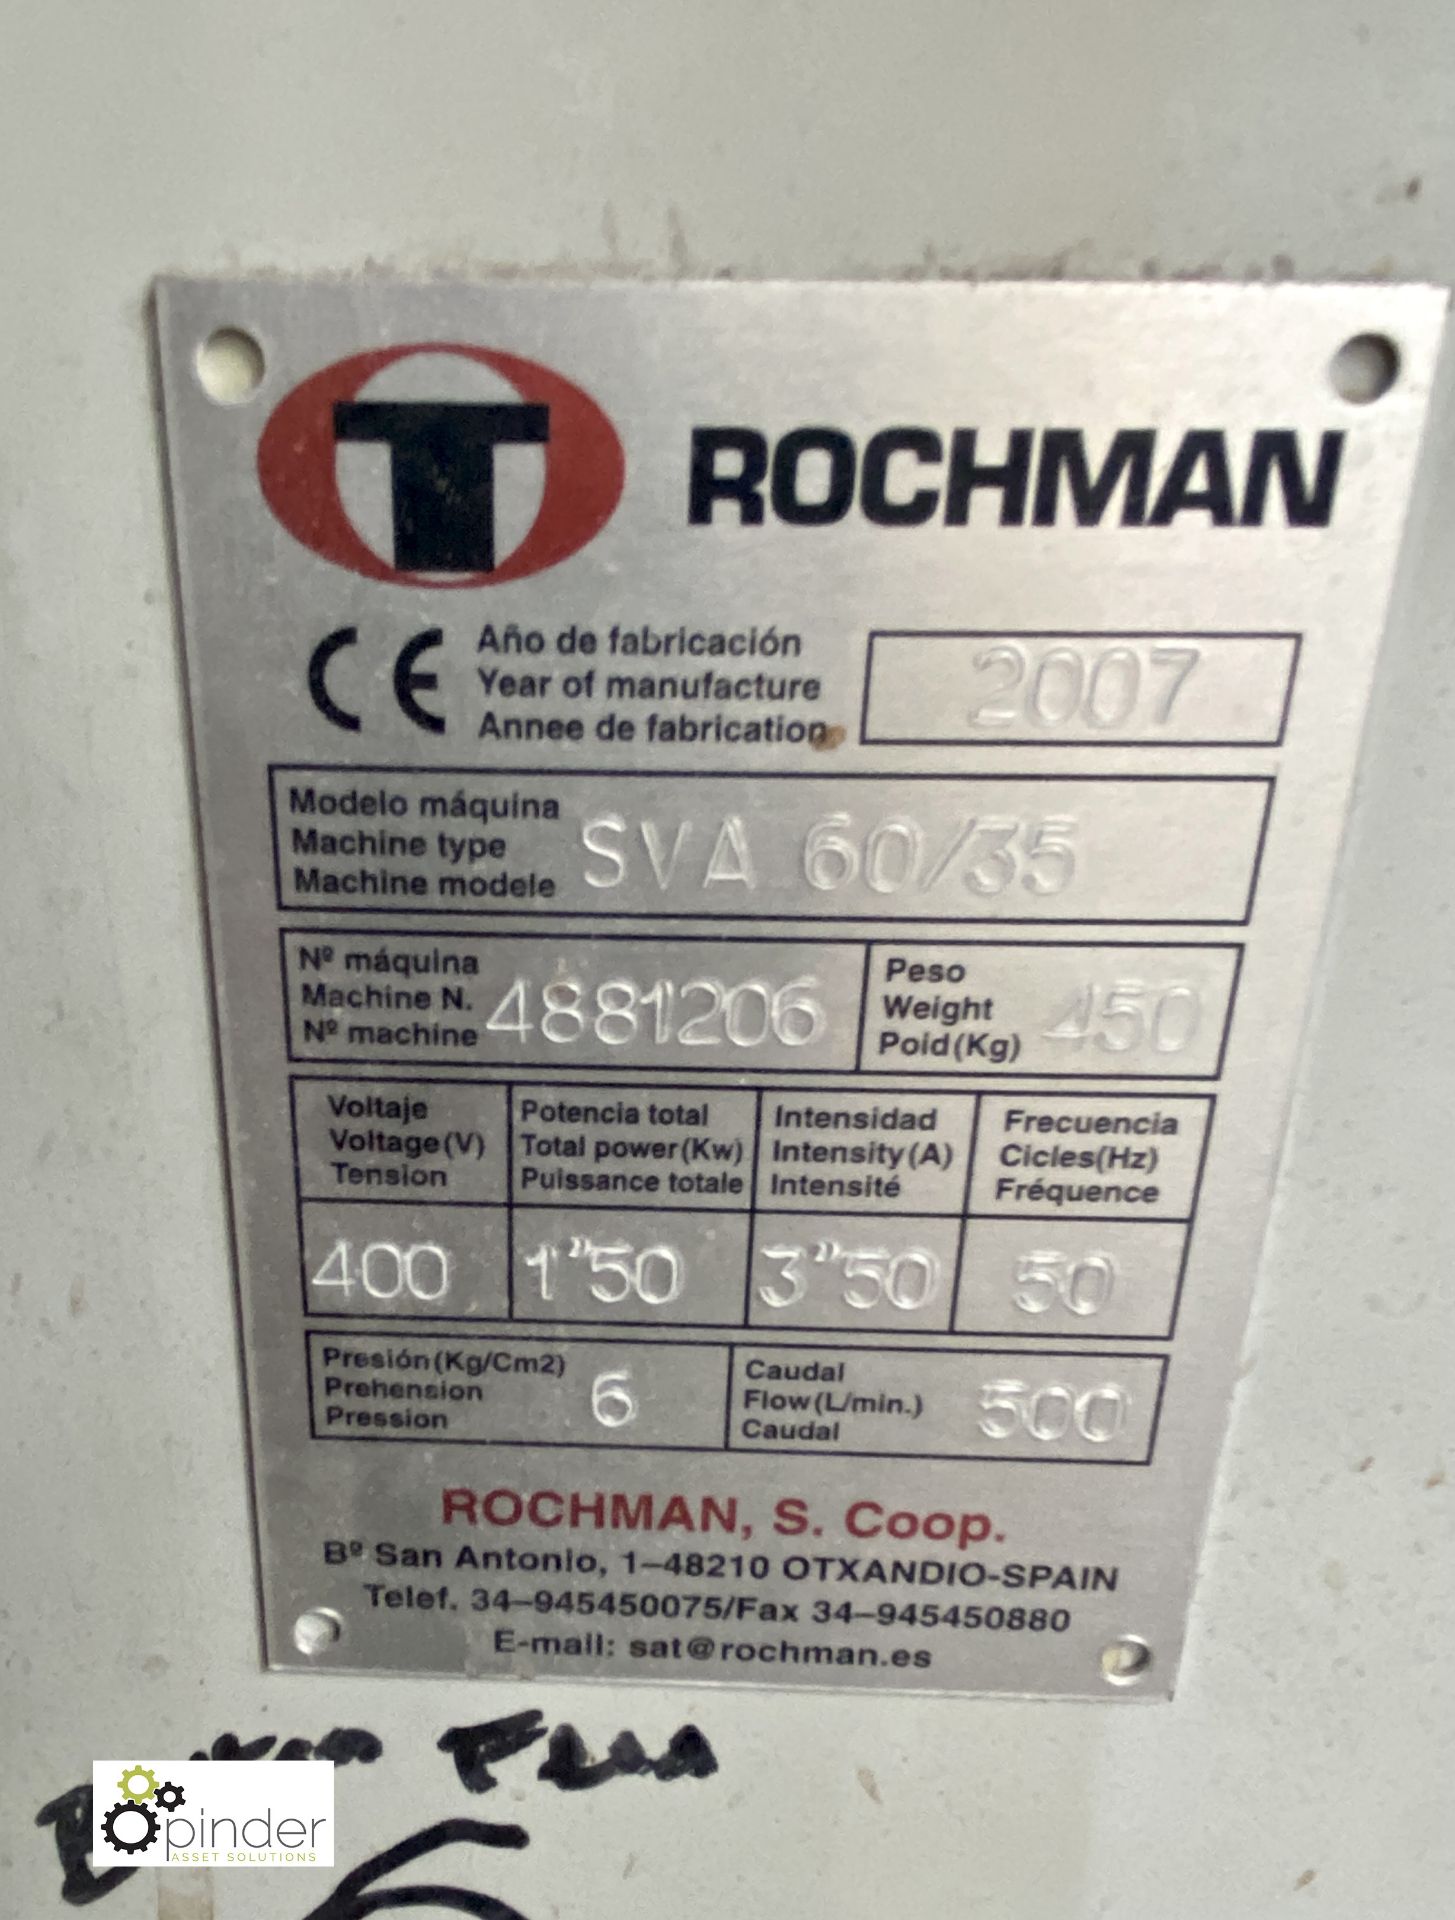 Rochman SVA60/35 Sleeve Sealer, 400volts, serial number 4881206, year 2007, with Rochman TR65/ - Image 7 of 15